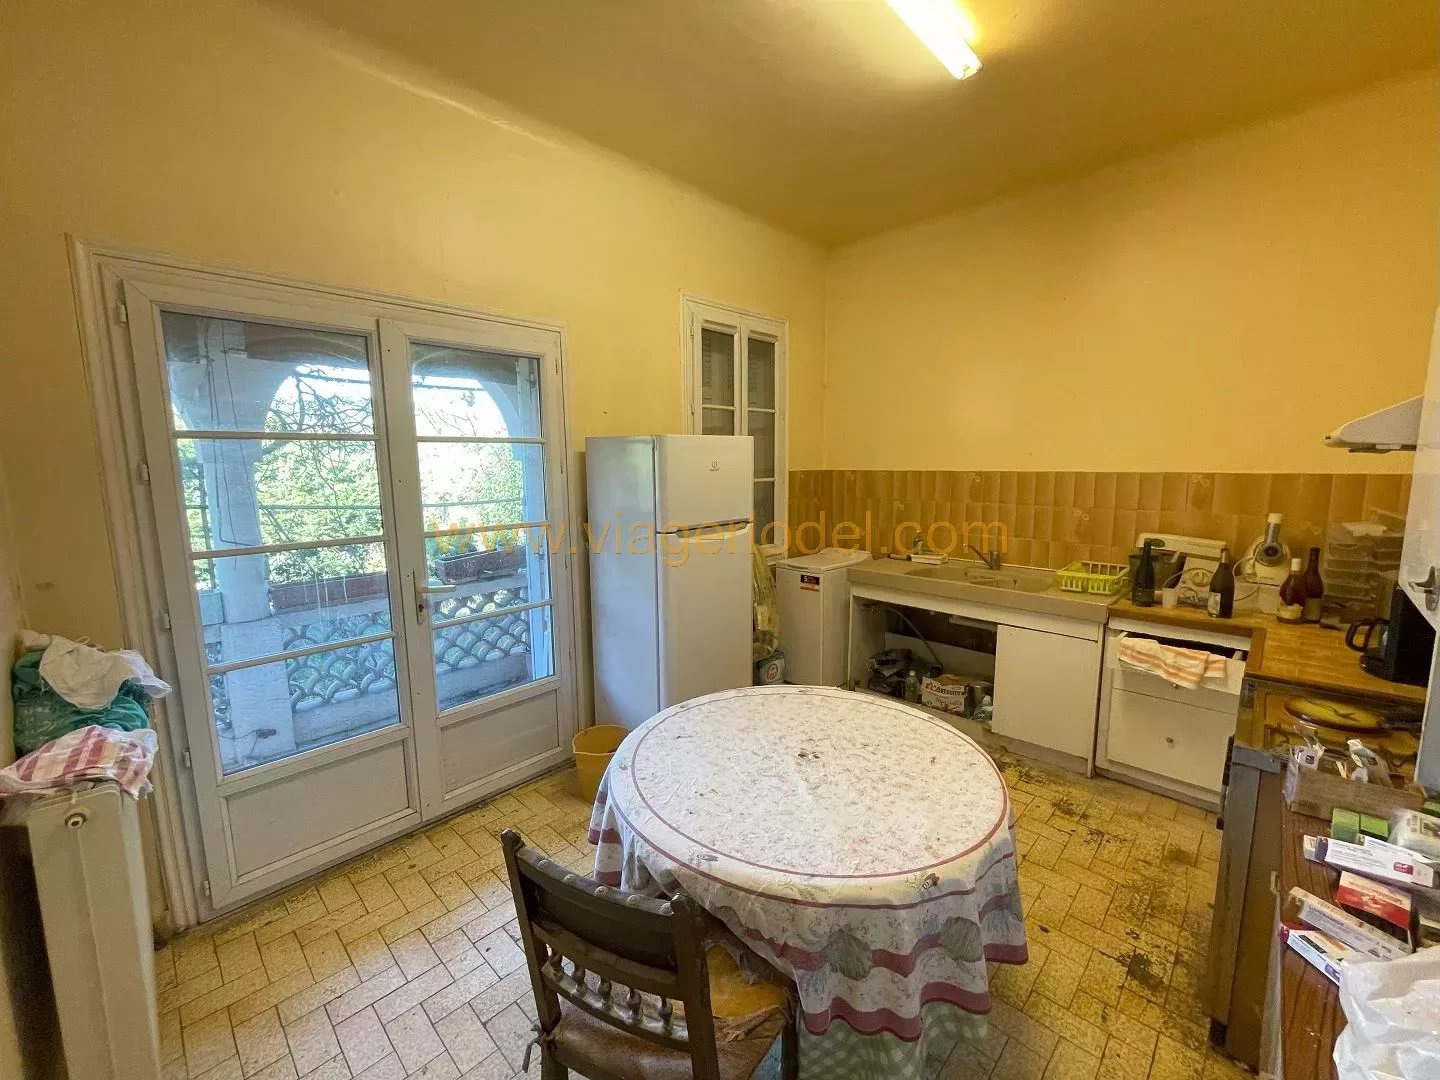 Ref. 9293 OCCUPIED VIAGER (LIFE ANNUITY), MOUGINS (06)